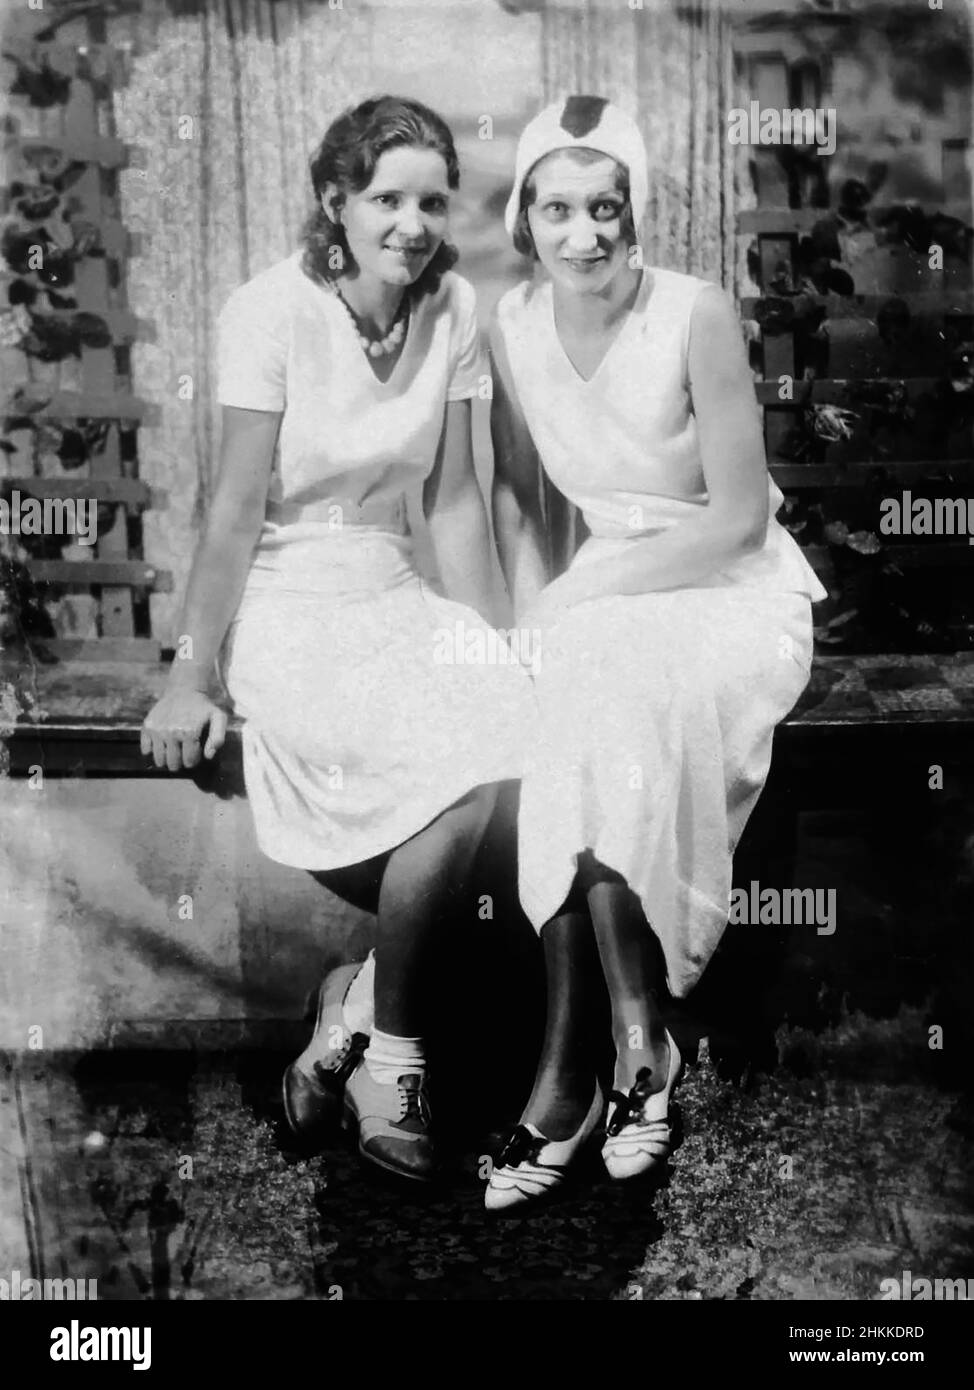 Two young women sit together and pose, ca. 1930. Stock Photo